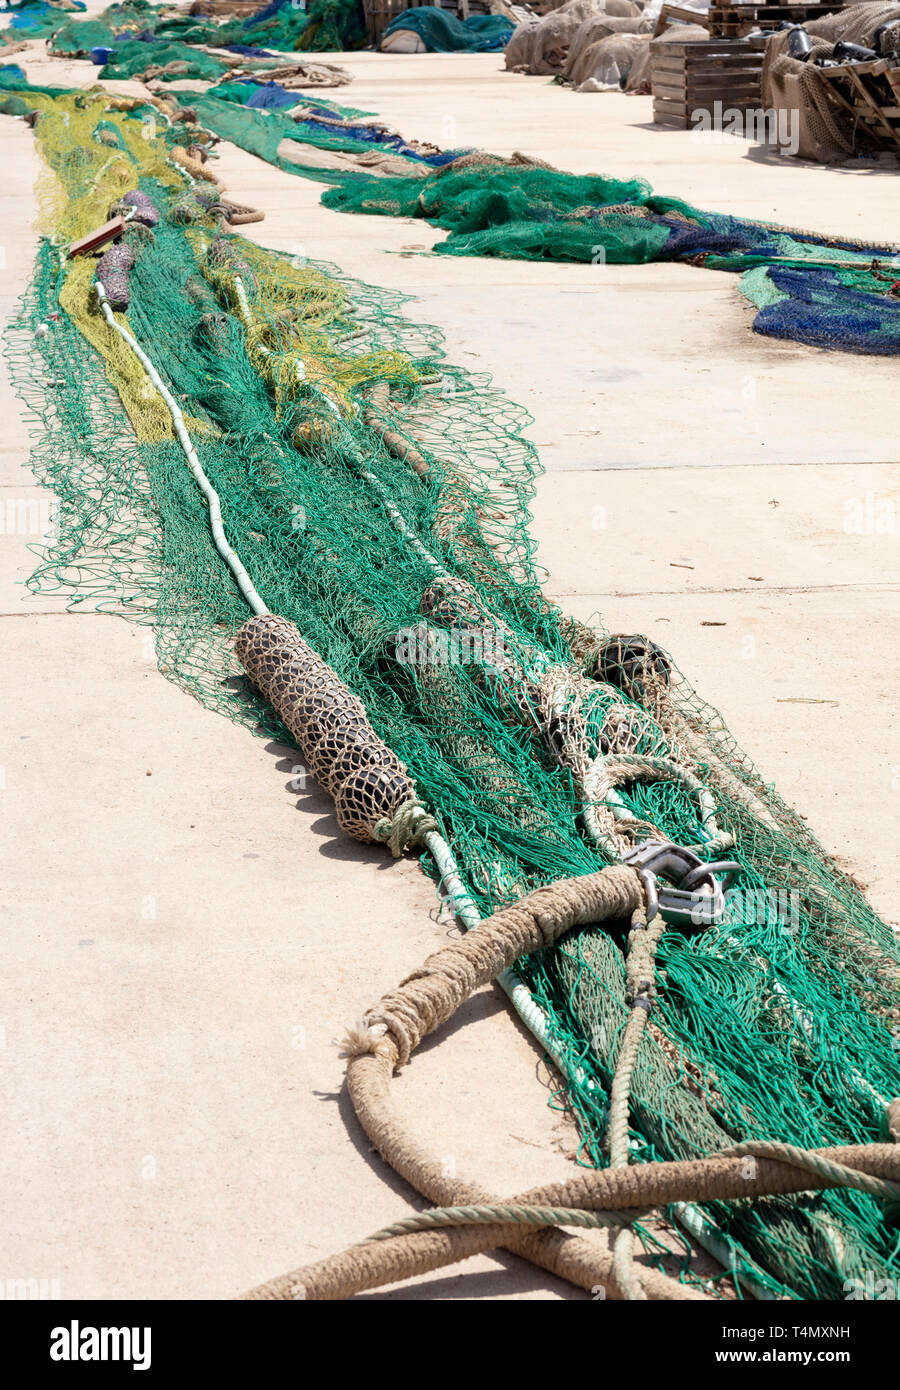 https://c8.alamy.com/comp/T4MXNH/fishing-nets-extended-in-the-port-to-be-revised-there-are-blue-and-green-with-wooden-boxes-in-the-background-T4MXNH.jpg